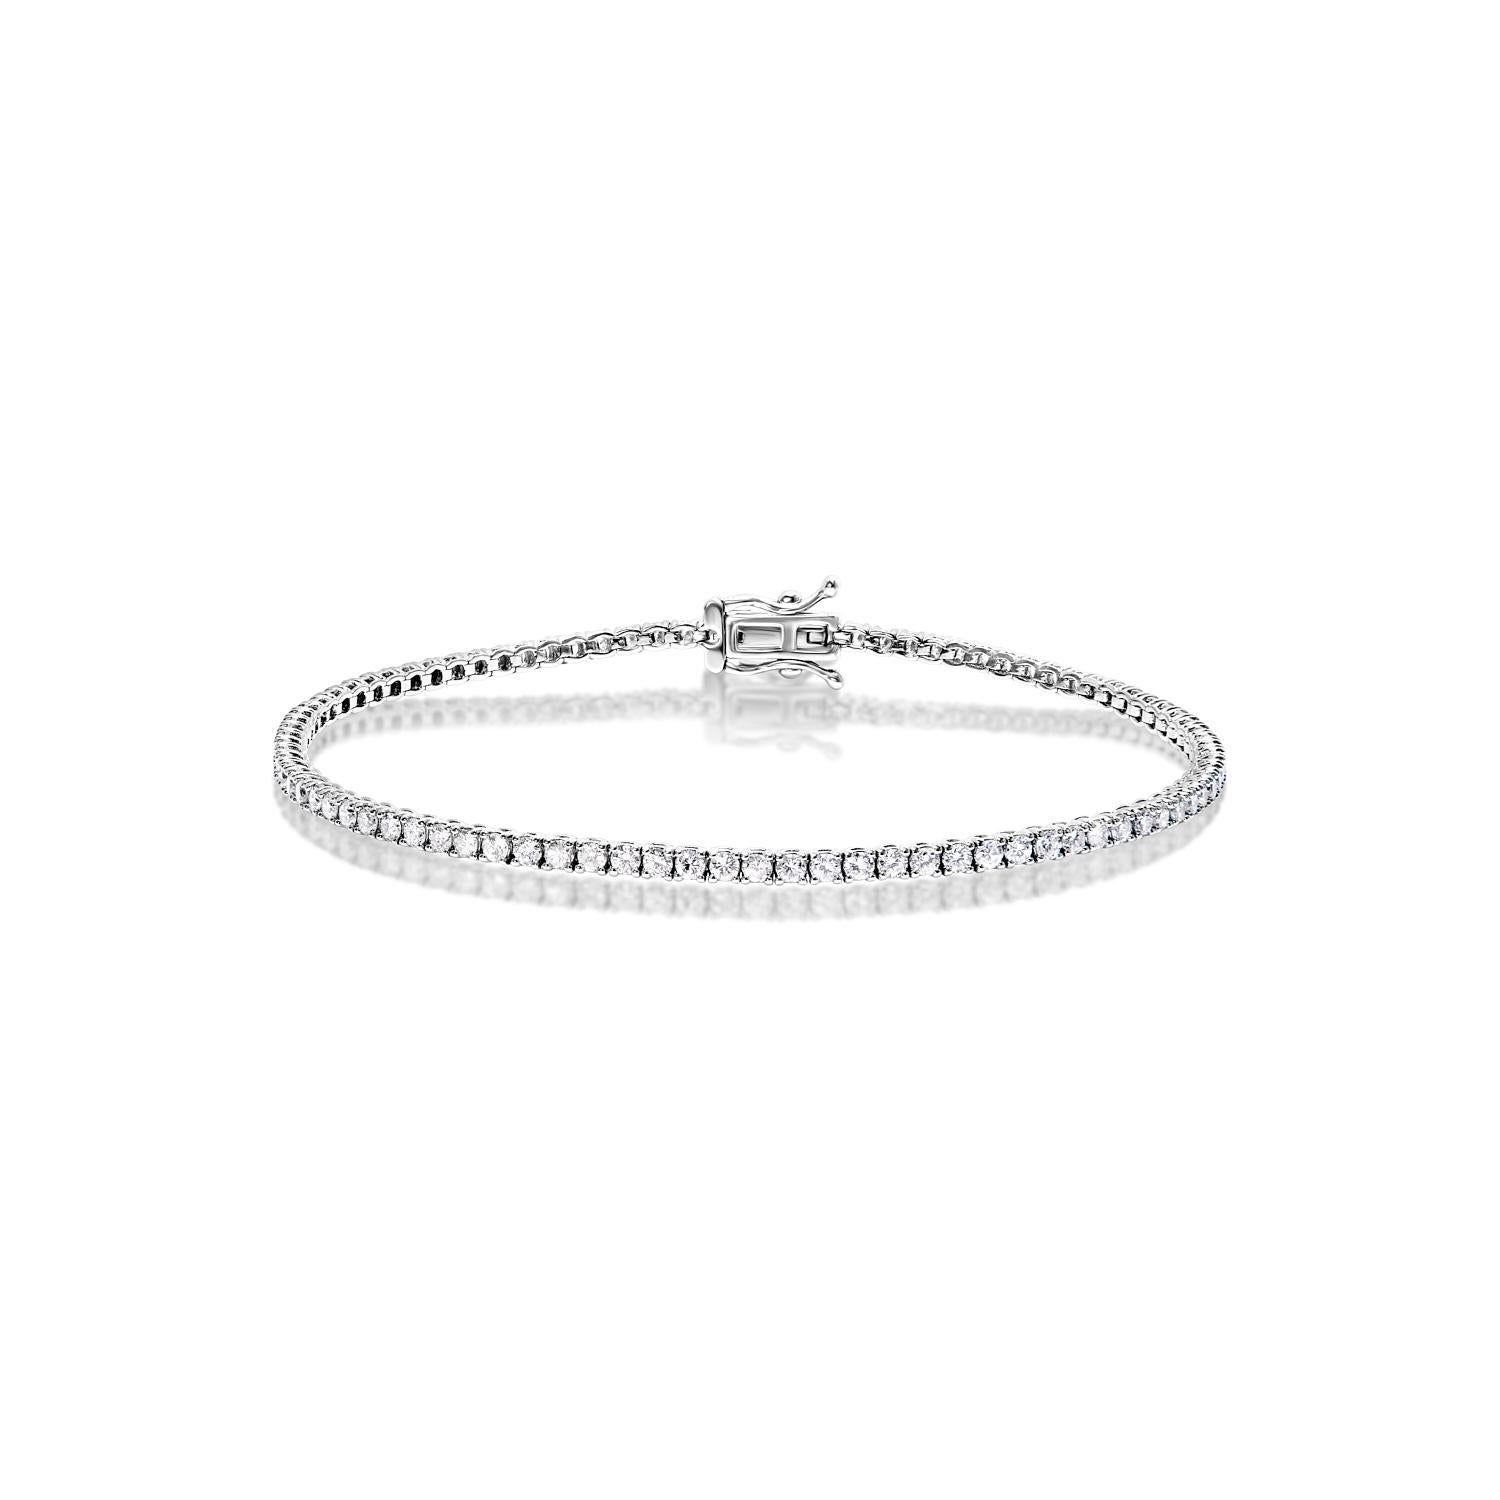 The CALLIOPE 2 Carat Single Diamond Tennis Bracelet features Round Brilliant CUT DIAMONDS brilliants weighing a total of approximately 2 carats, set in 14K White Gold.

Style:
Diamonds
Diamond Size: 1.50 Carats
Diamond Shape: Round Brilliant